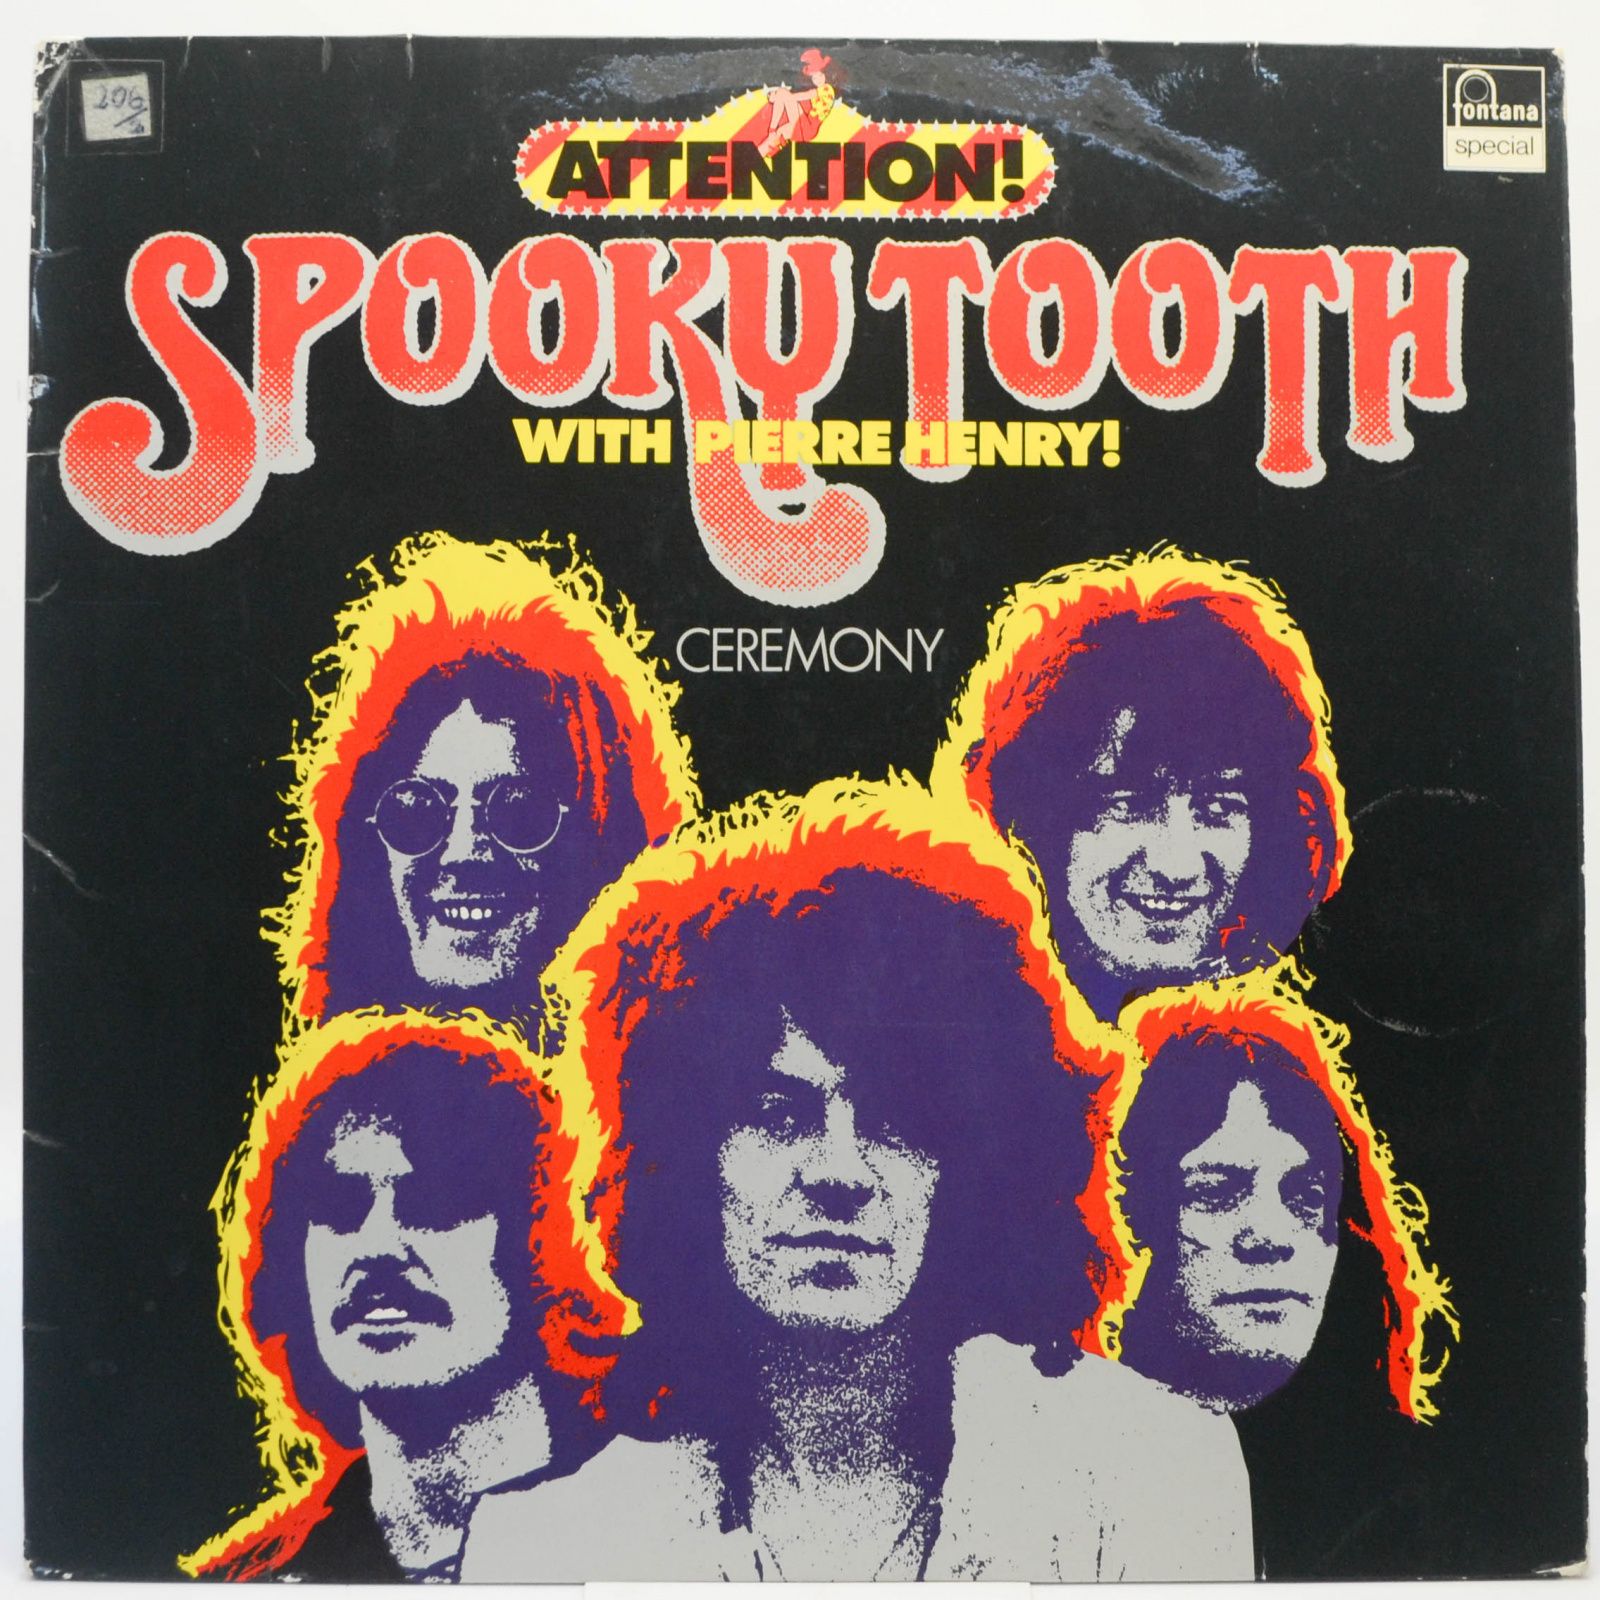 Spooky Tooth With Pierre Henry — Ceremony, 1980